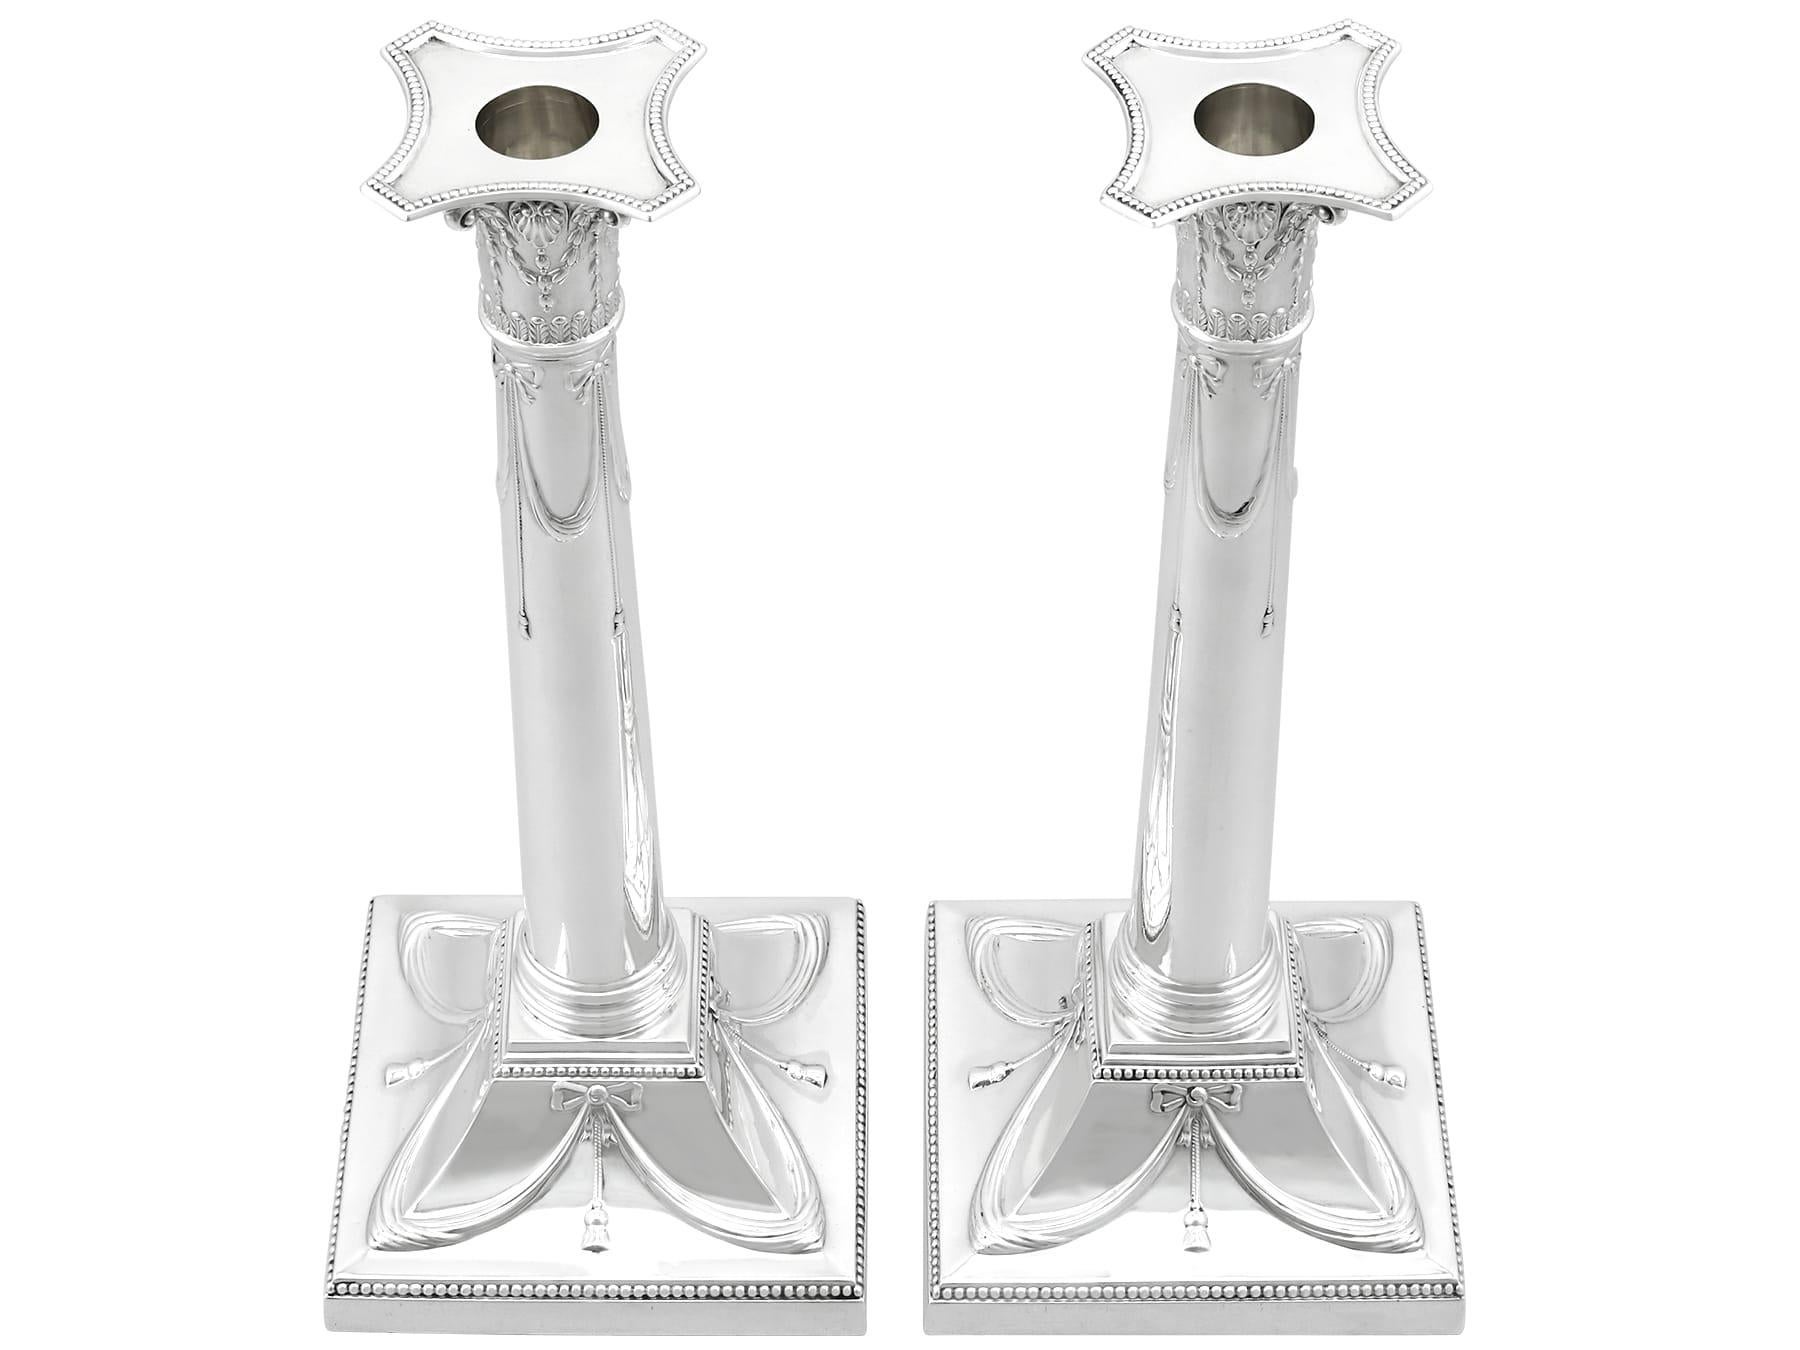 An exceptional, fine and impressive pair of antique George V English sterling silver candlesticks; an addition to our antique silverware collection

These exceptional, fine and impressive antique George V sterling silver candlesticks have a